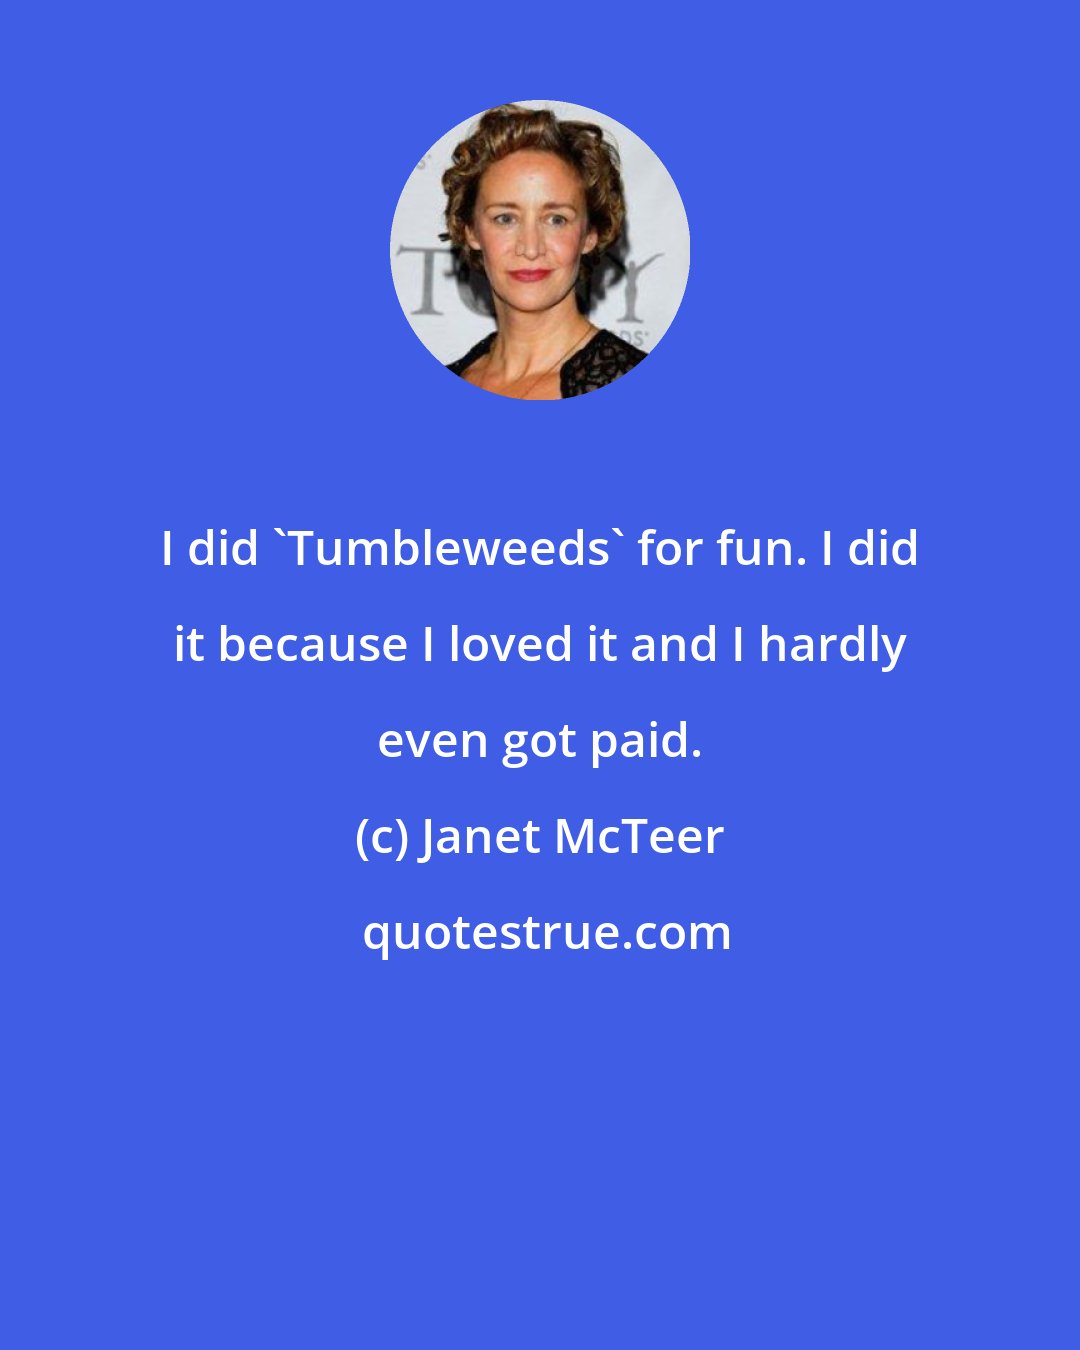 Janet McTeer: I did 'Tumbleweeds' for fun. I did it because I loved it and I hardly even got paid.